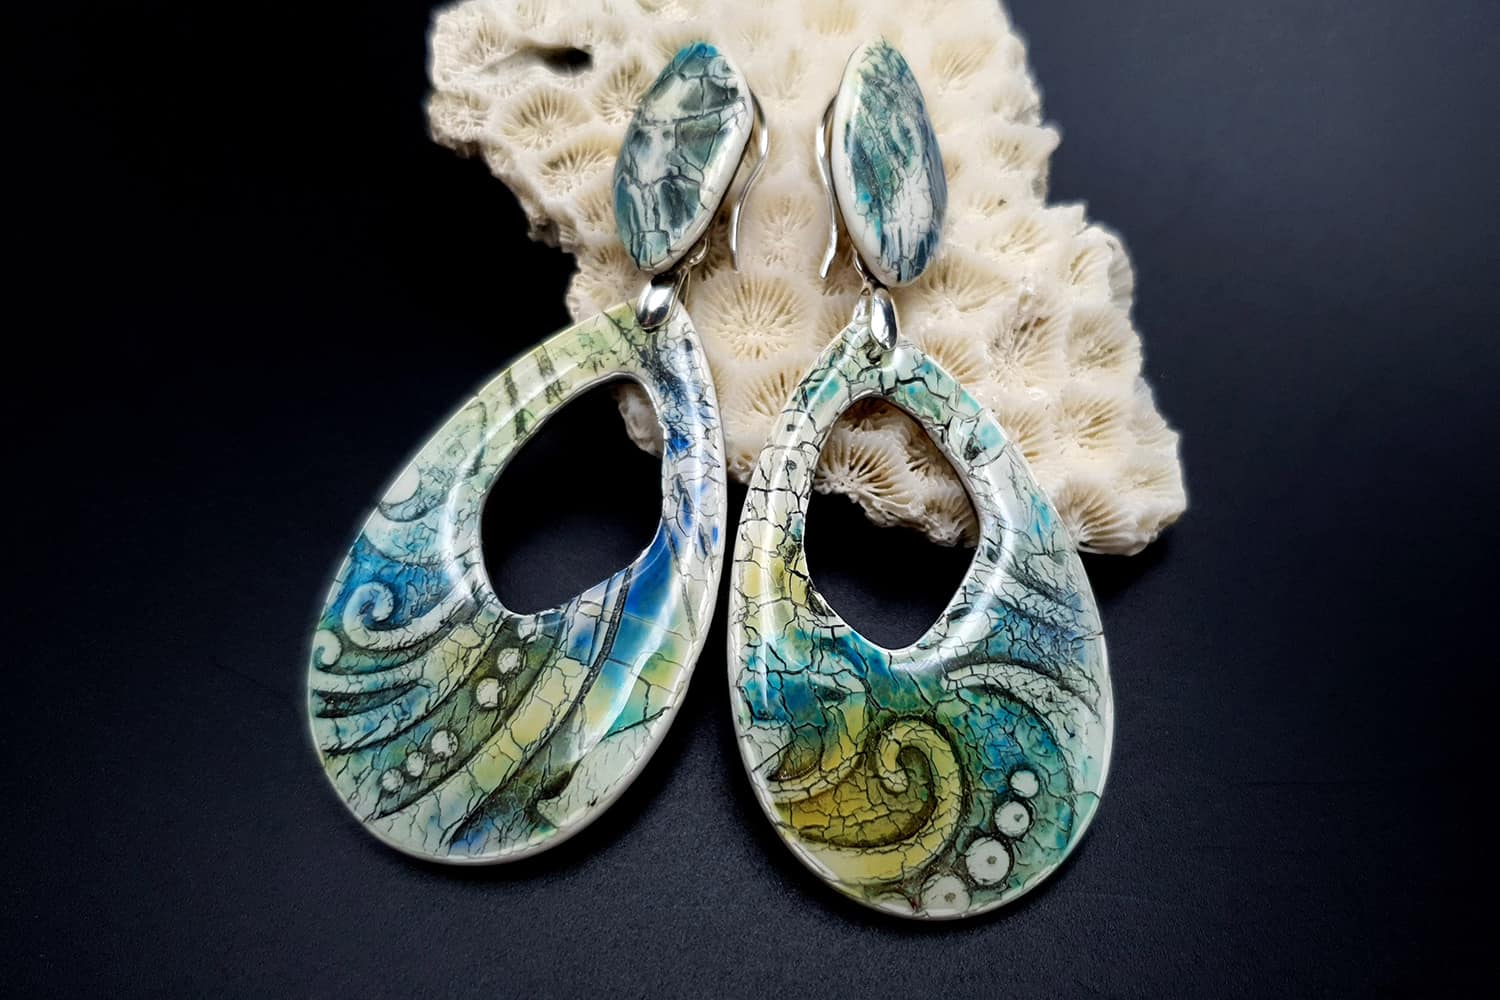 Jewelry from "Faux Glazed Cracked Ceramic" course for your inspiration #11